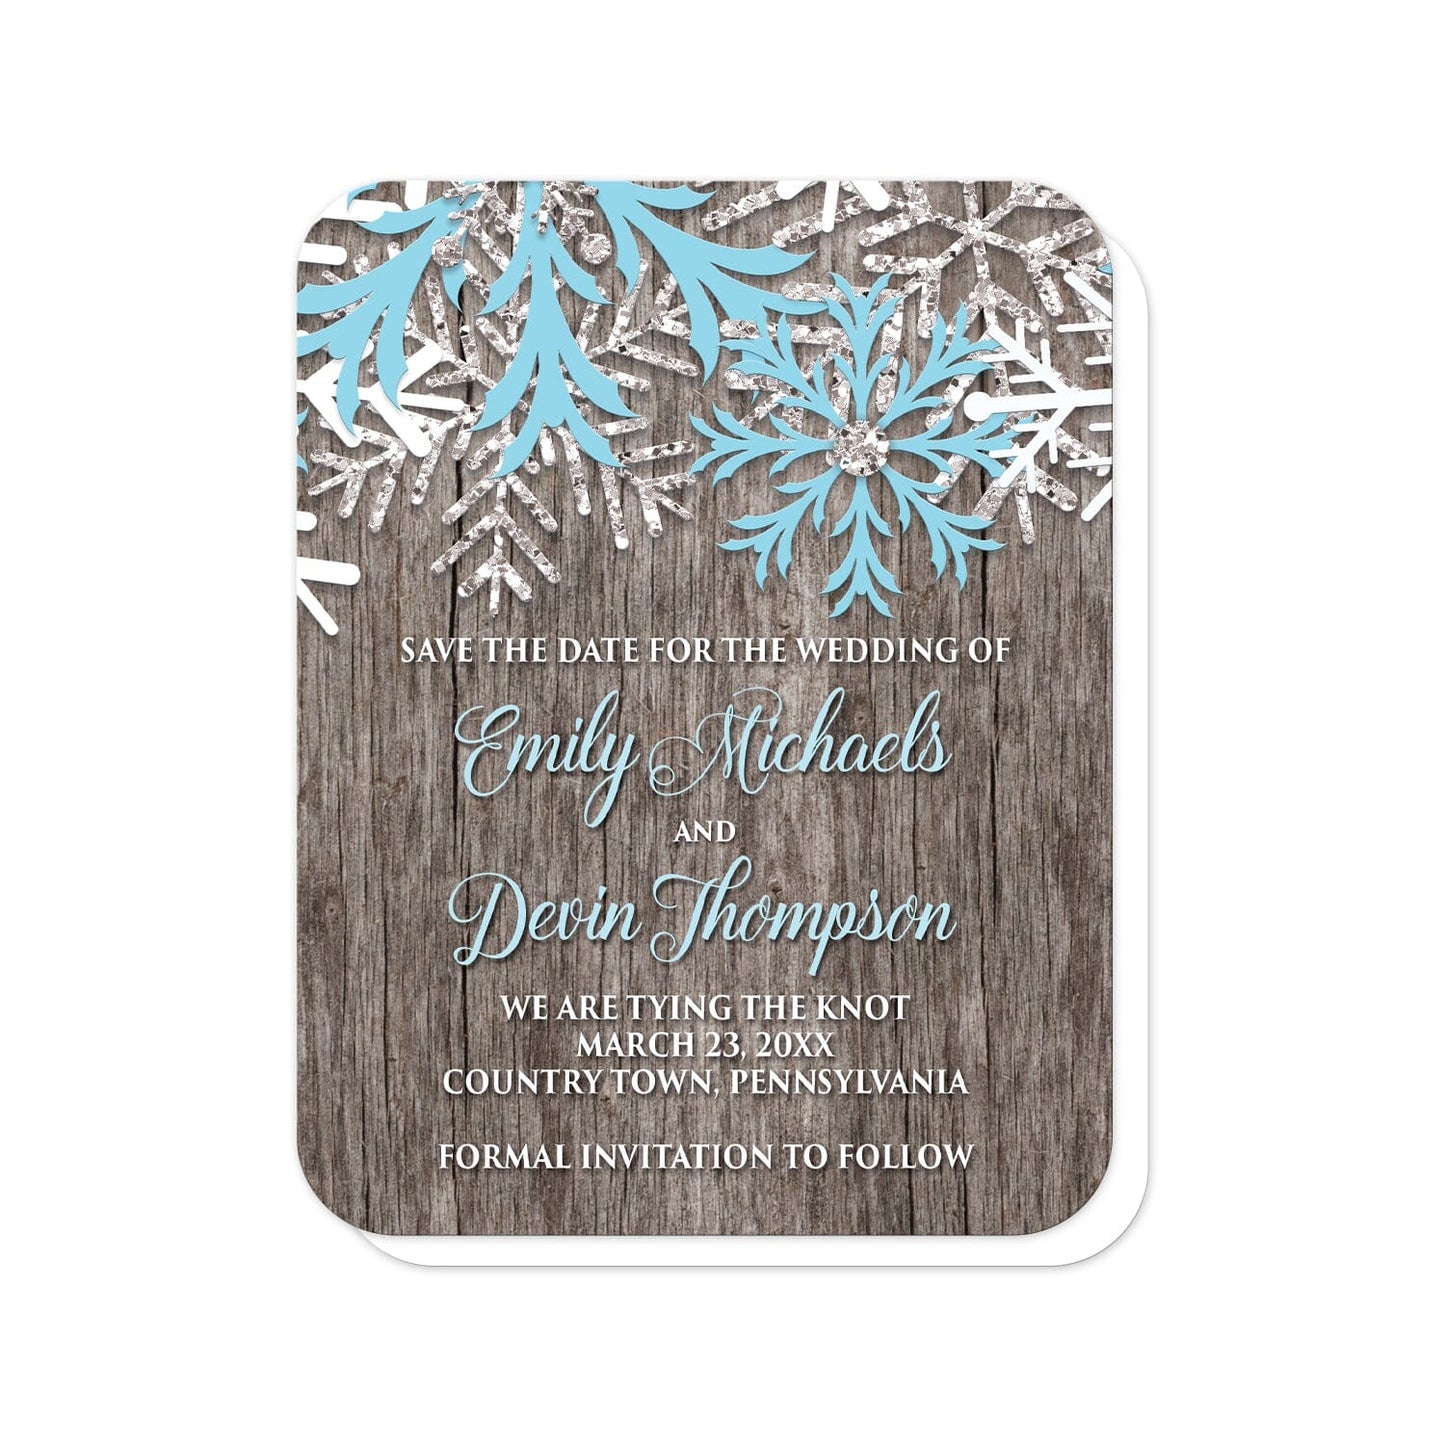 Rustic Winter Wood Blue Snowflake Save the Date Cards (with rounded corners) at Artistically Invited. Country-inspired rustic winter wood blue snowflake save the date cards designed with light blue, white, and silver-colored glitter-illustrated snowflakes along the top over a rustic wood pattern illustration. Your personalized wedding date details are custom printed in light blue and white over the wood background below the snowflakes.